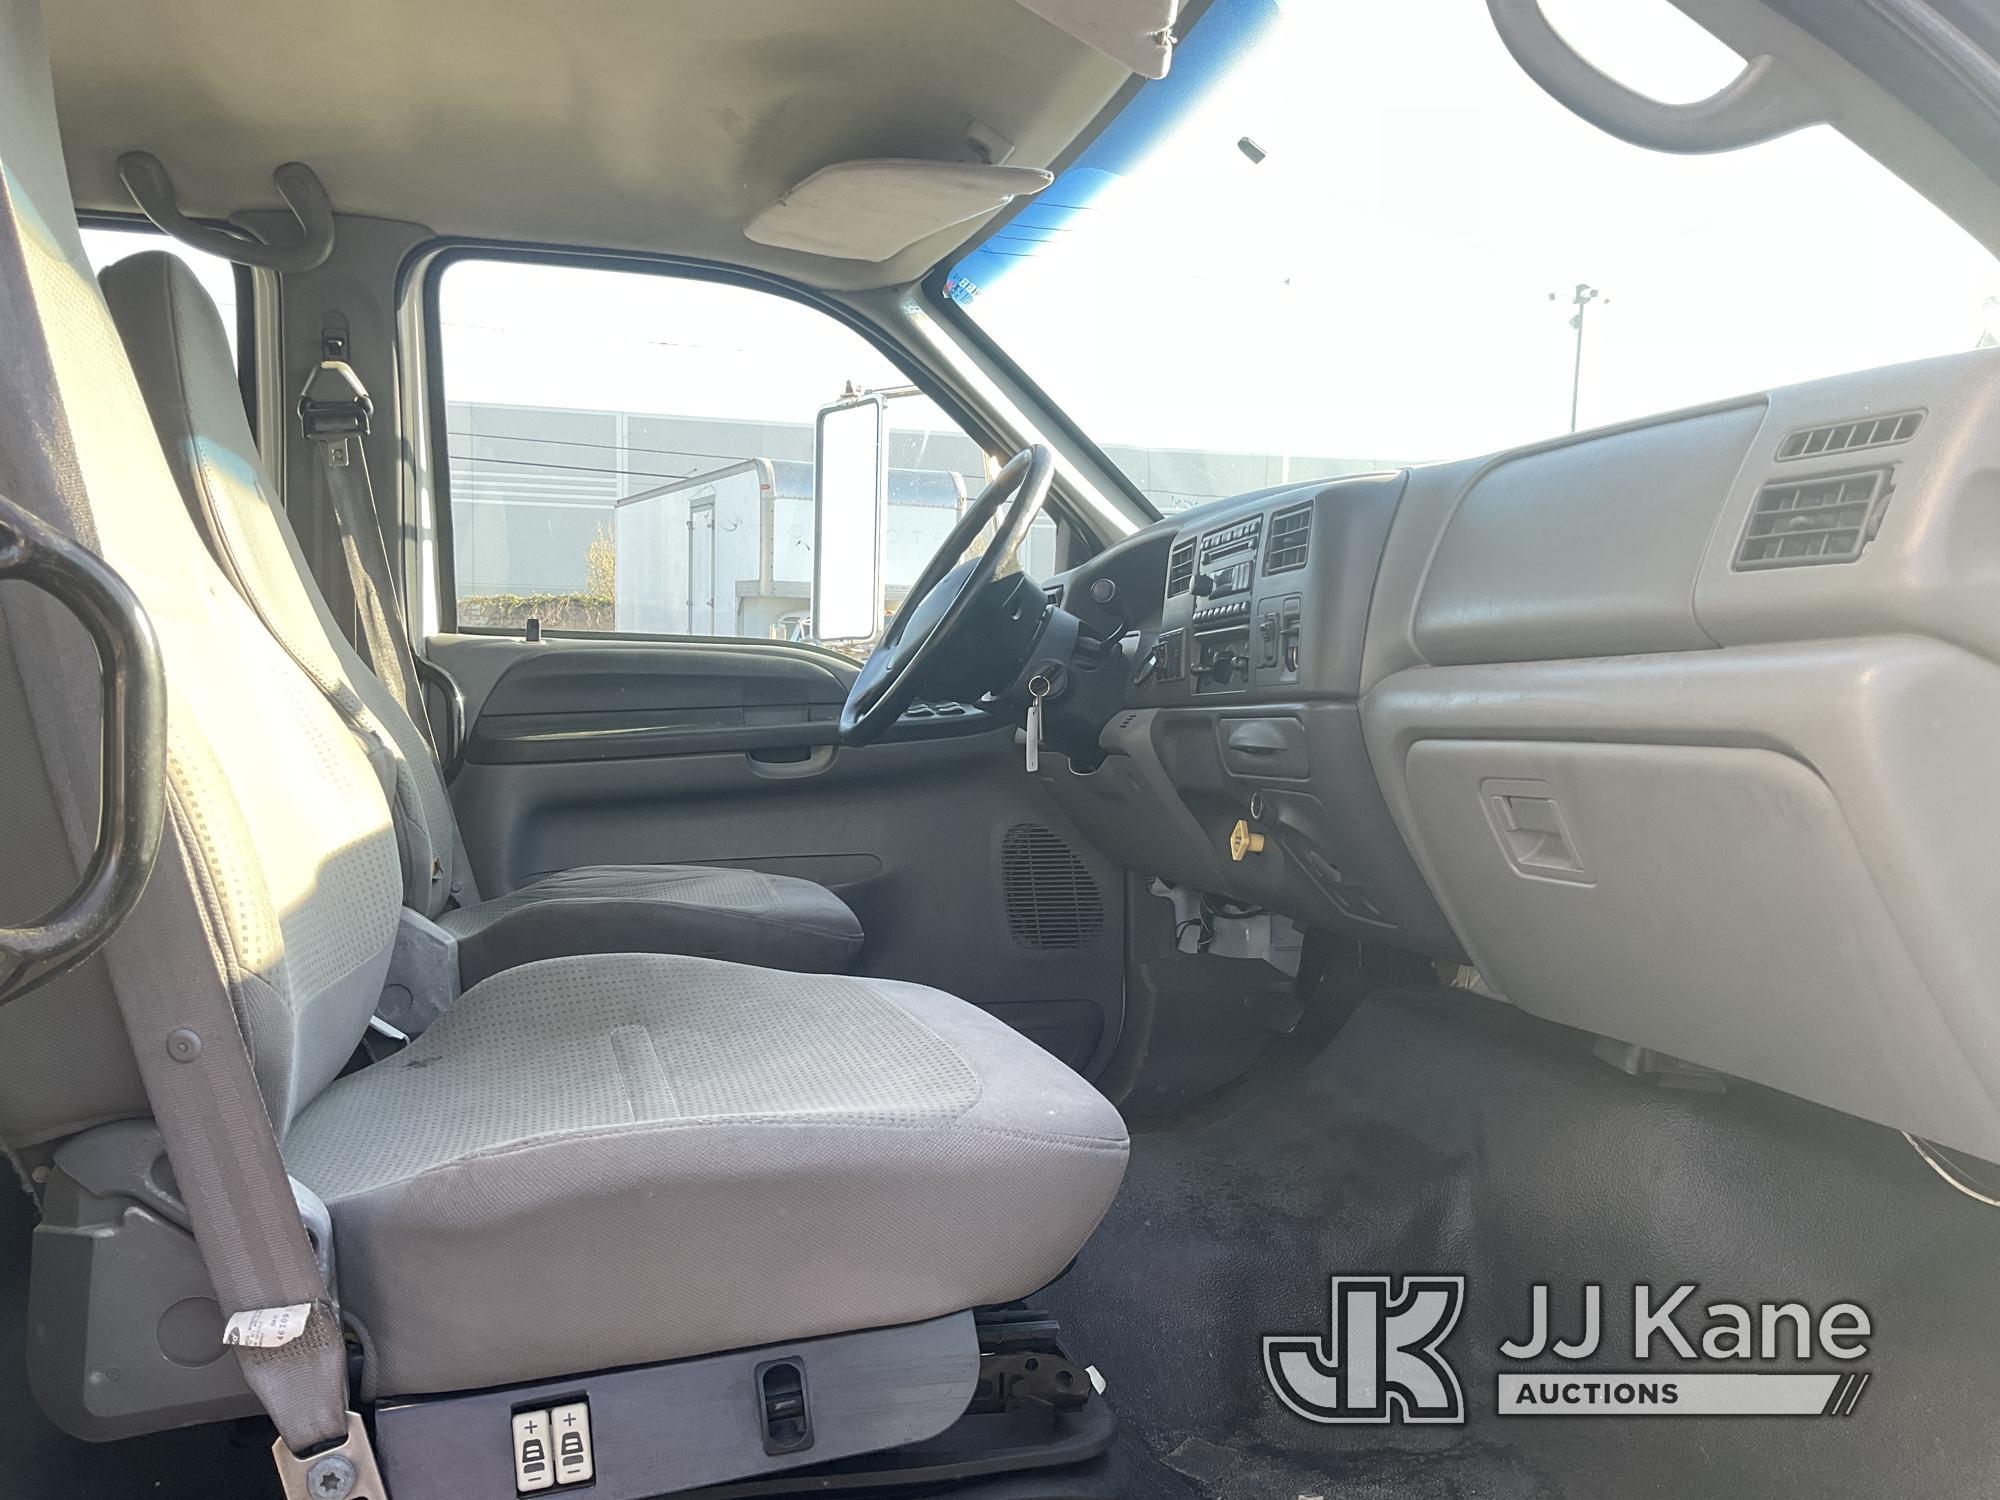 (Jurupa Valley, CA) 2010 Ford F650 Crew Cab Van Body Truck Must Be Registered Out Of State Due To CA